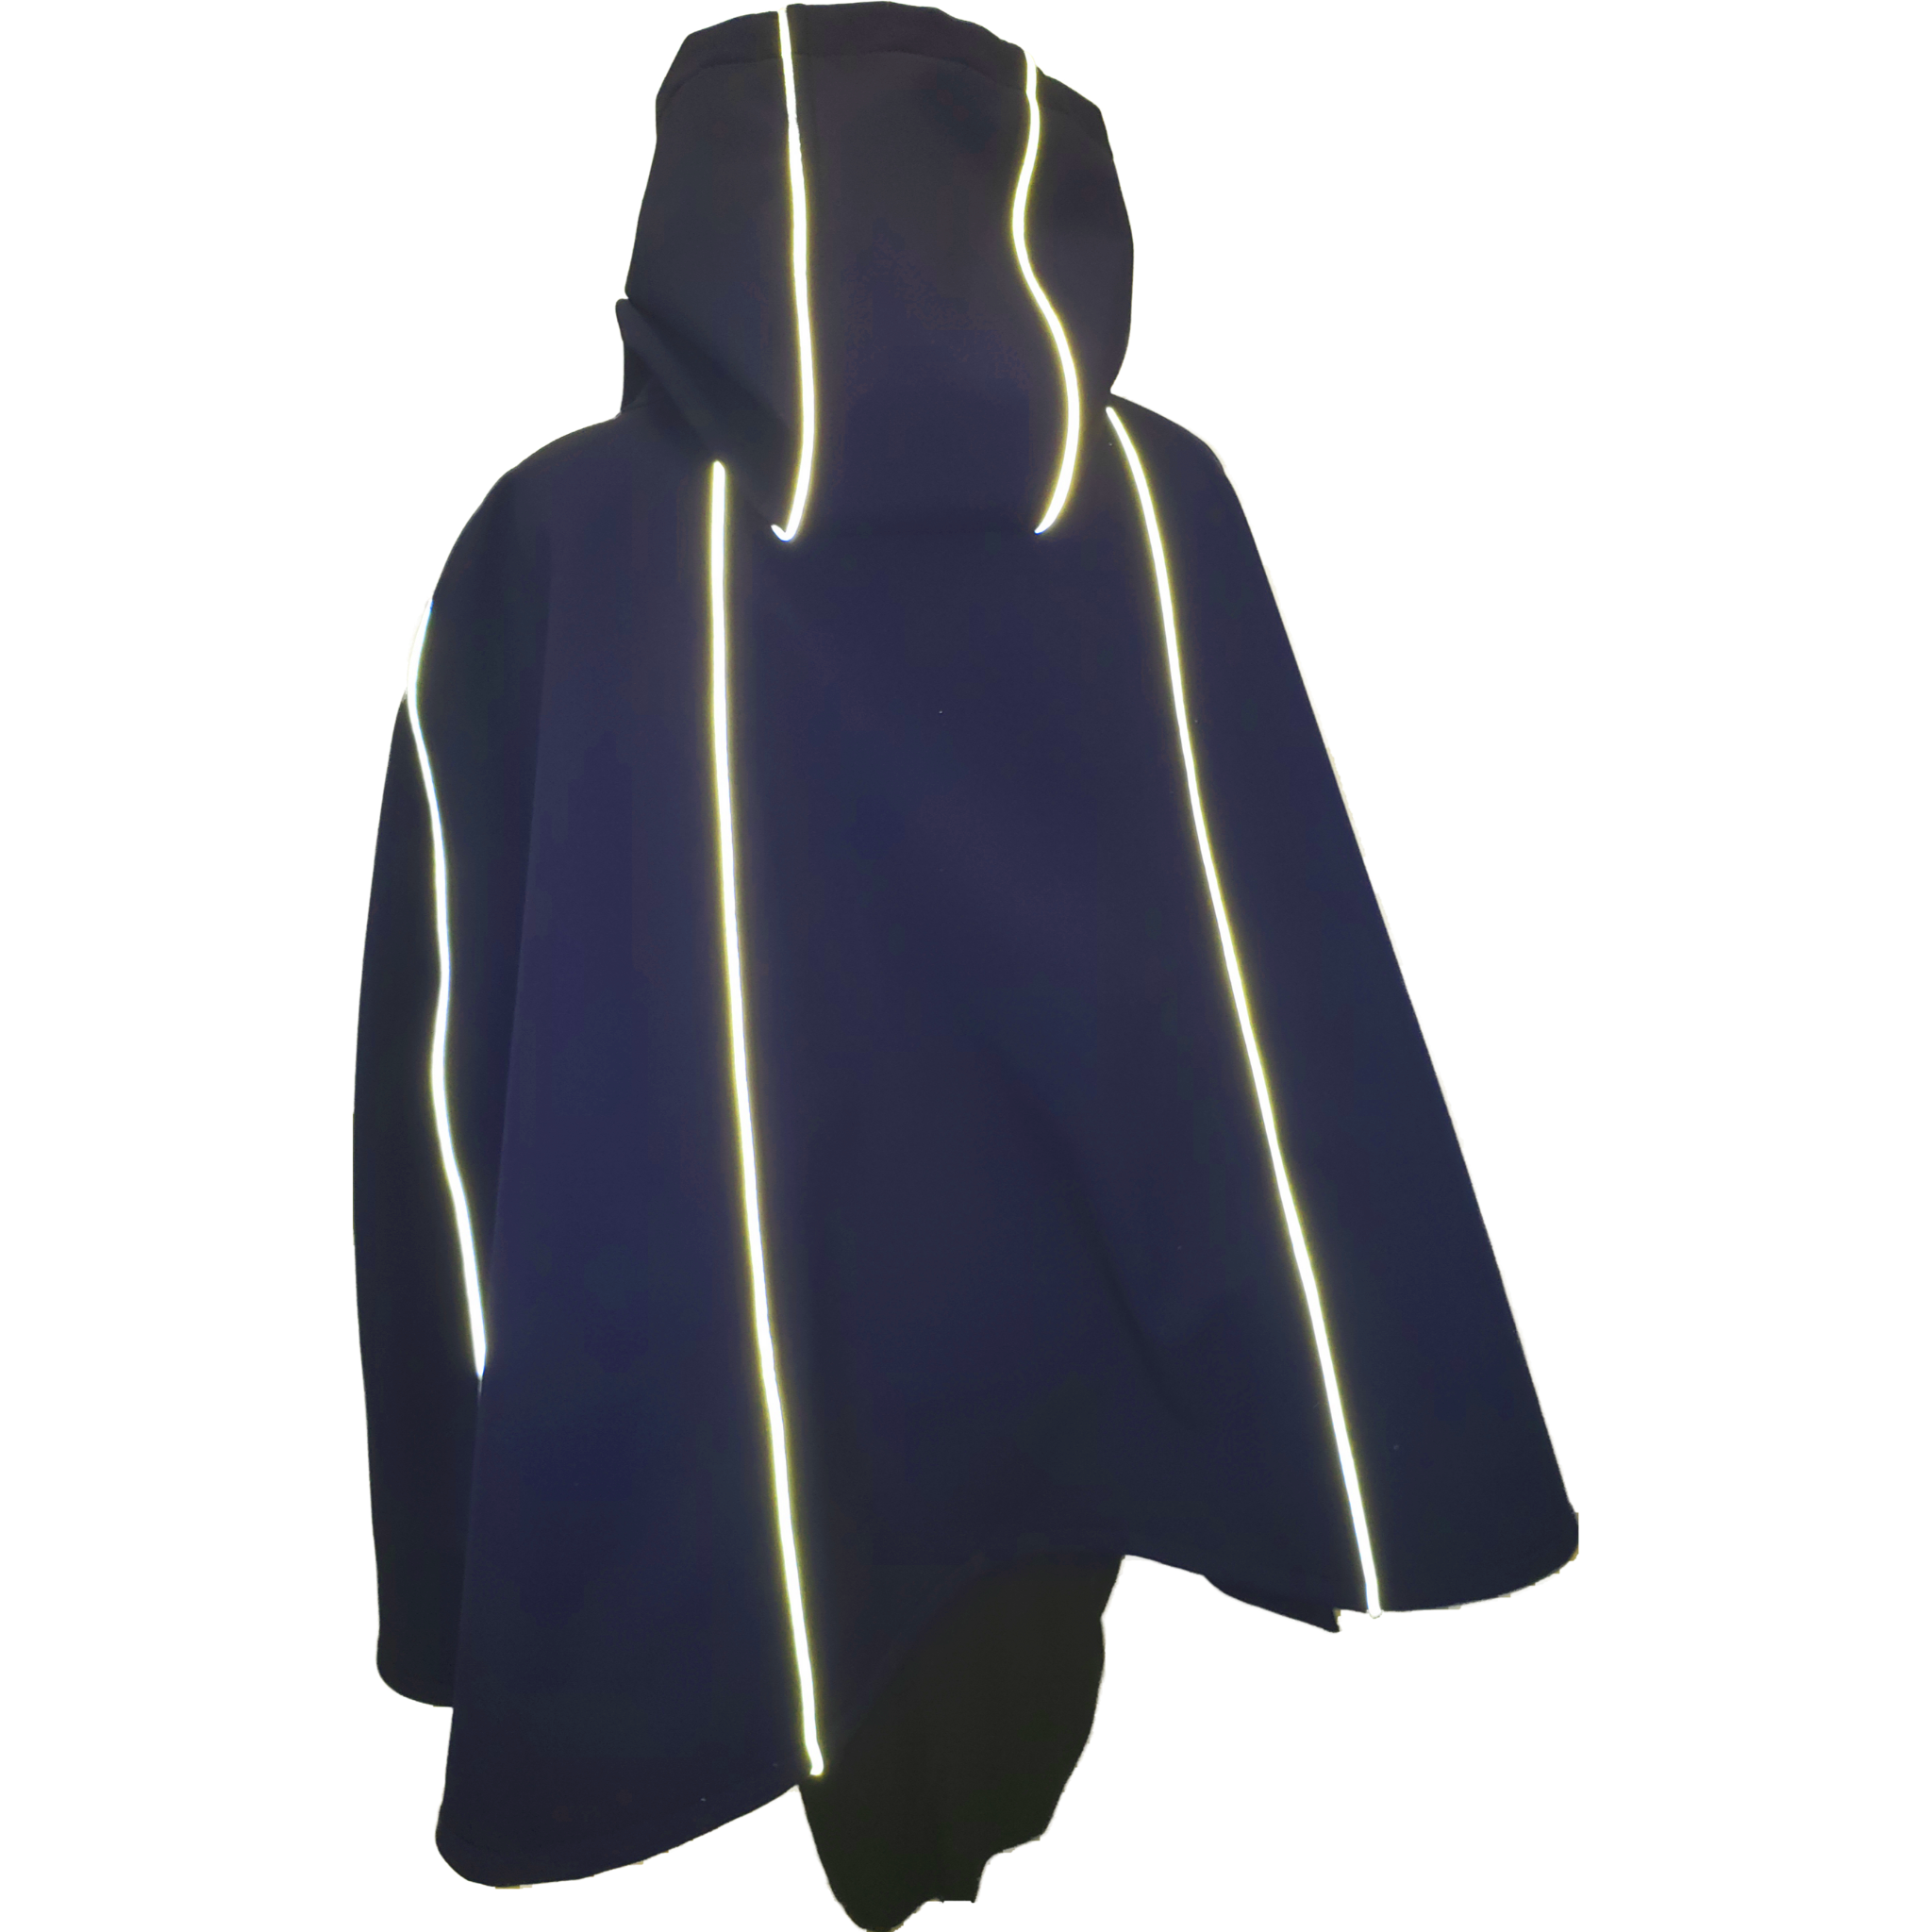 Waterproof Cape with Undervest